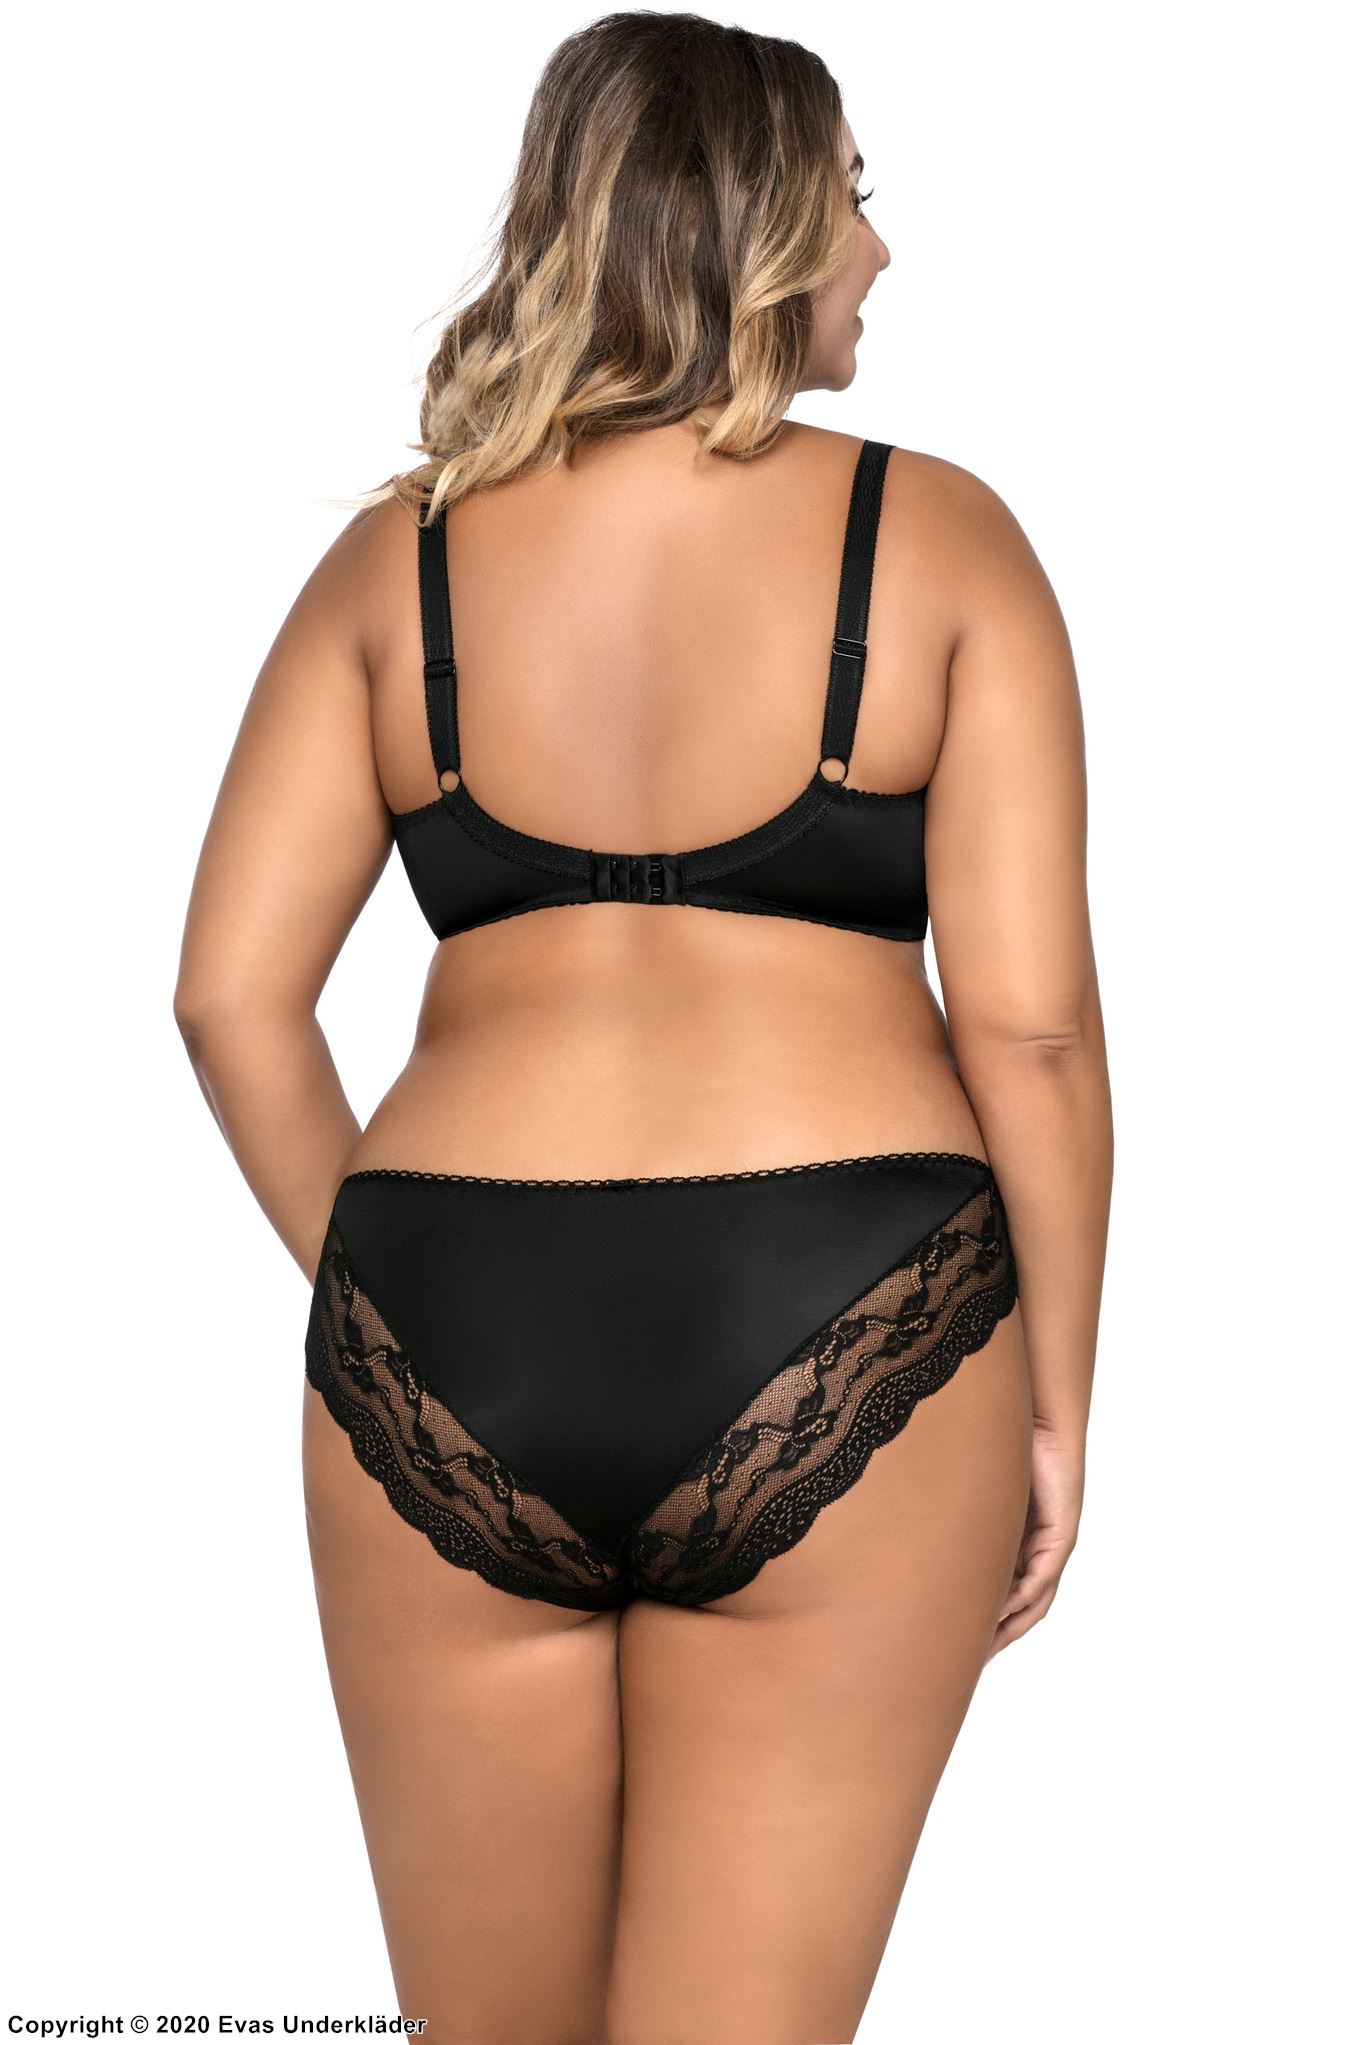 Comfortable bra, beautiful lace, B to L-cup